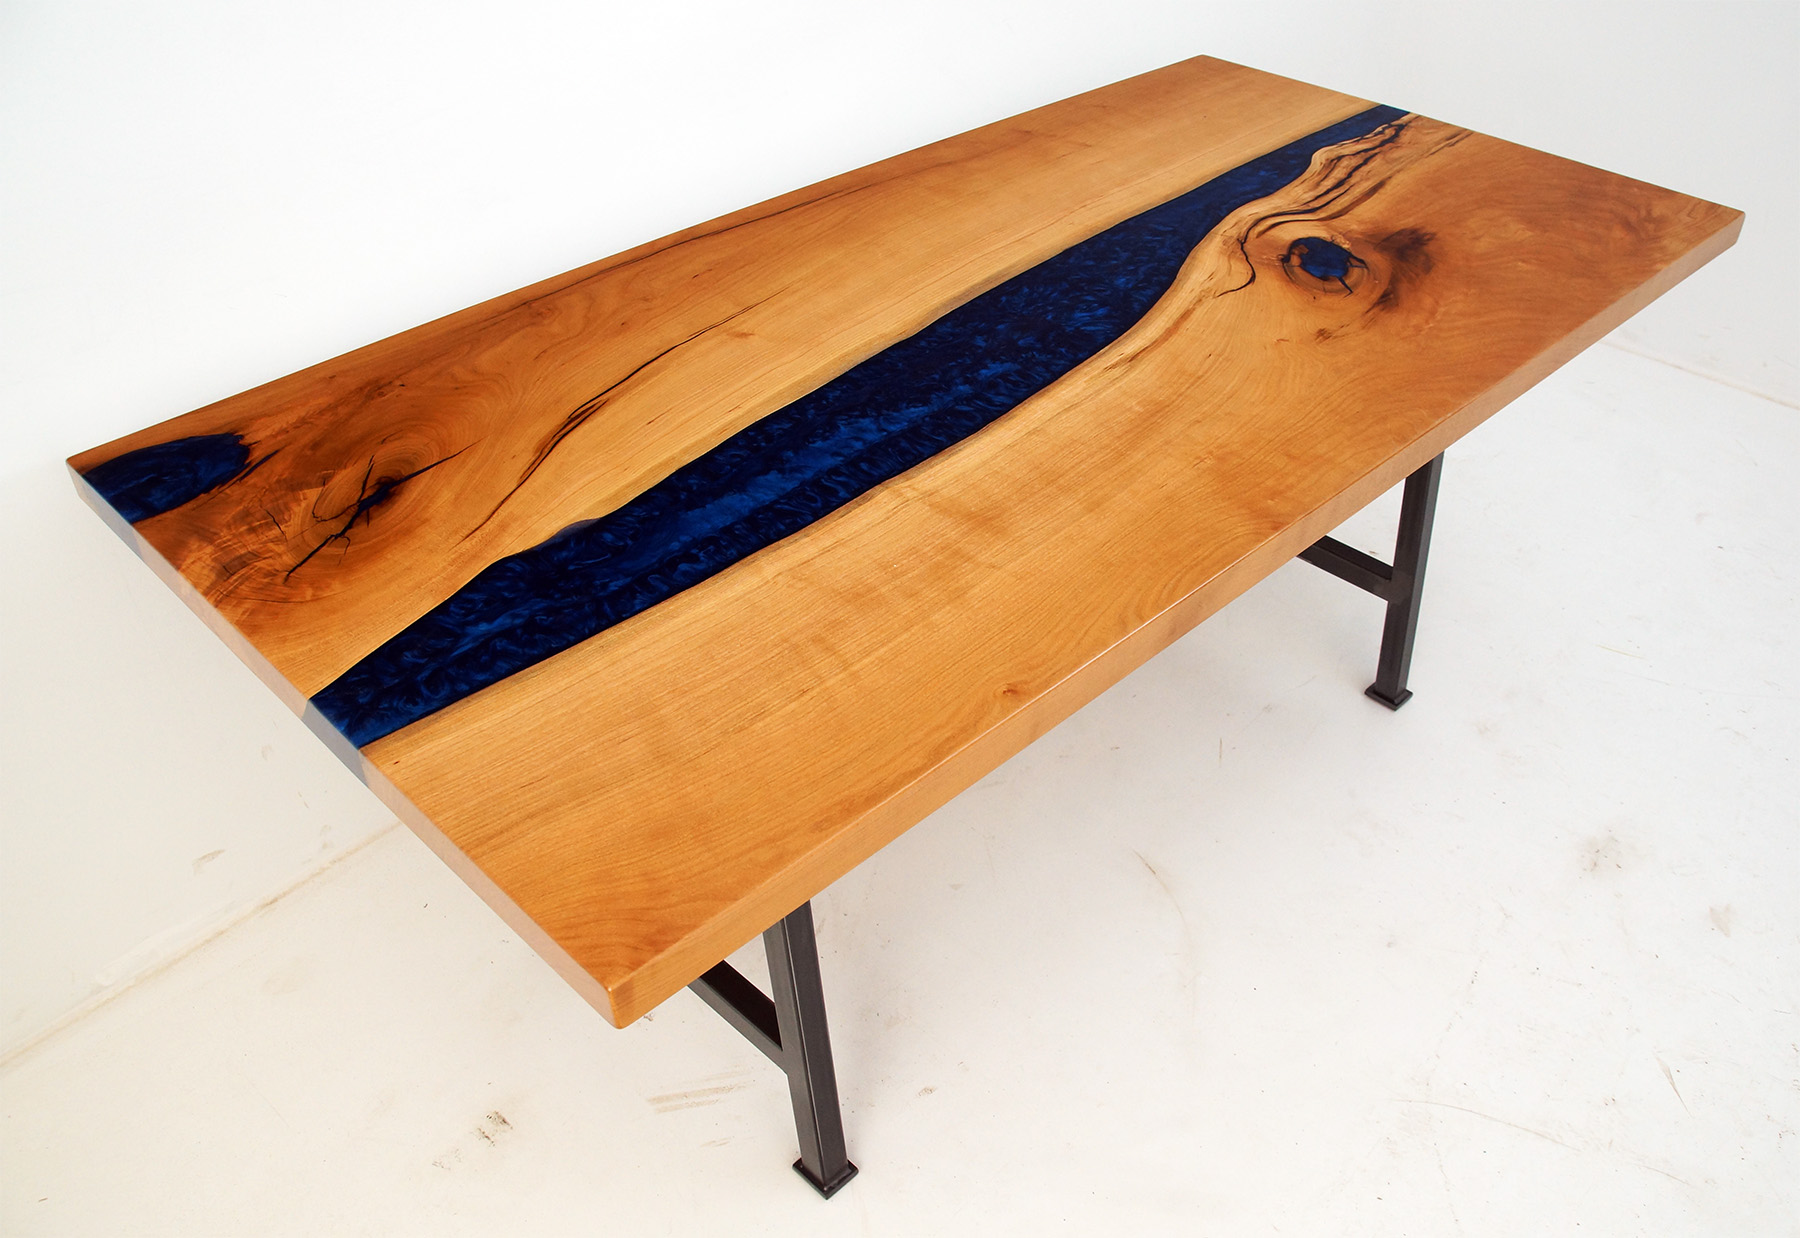 Cherry Wood Dining Table With Deep Blue Resin | $6,000+